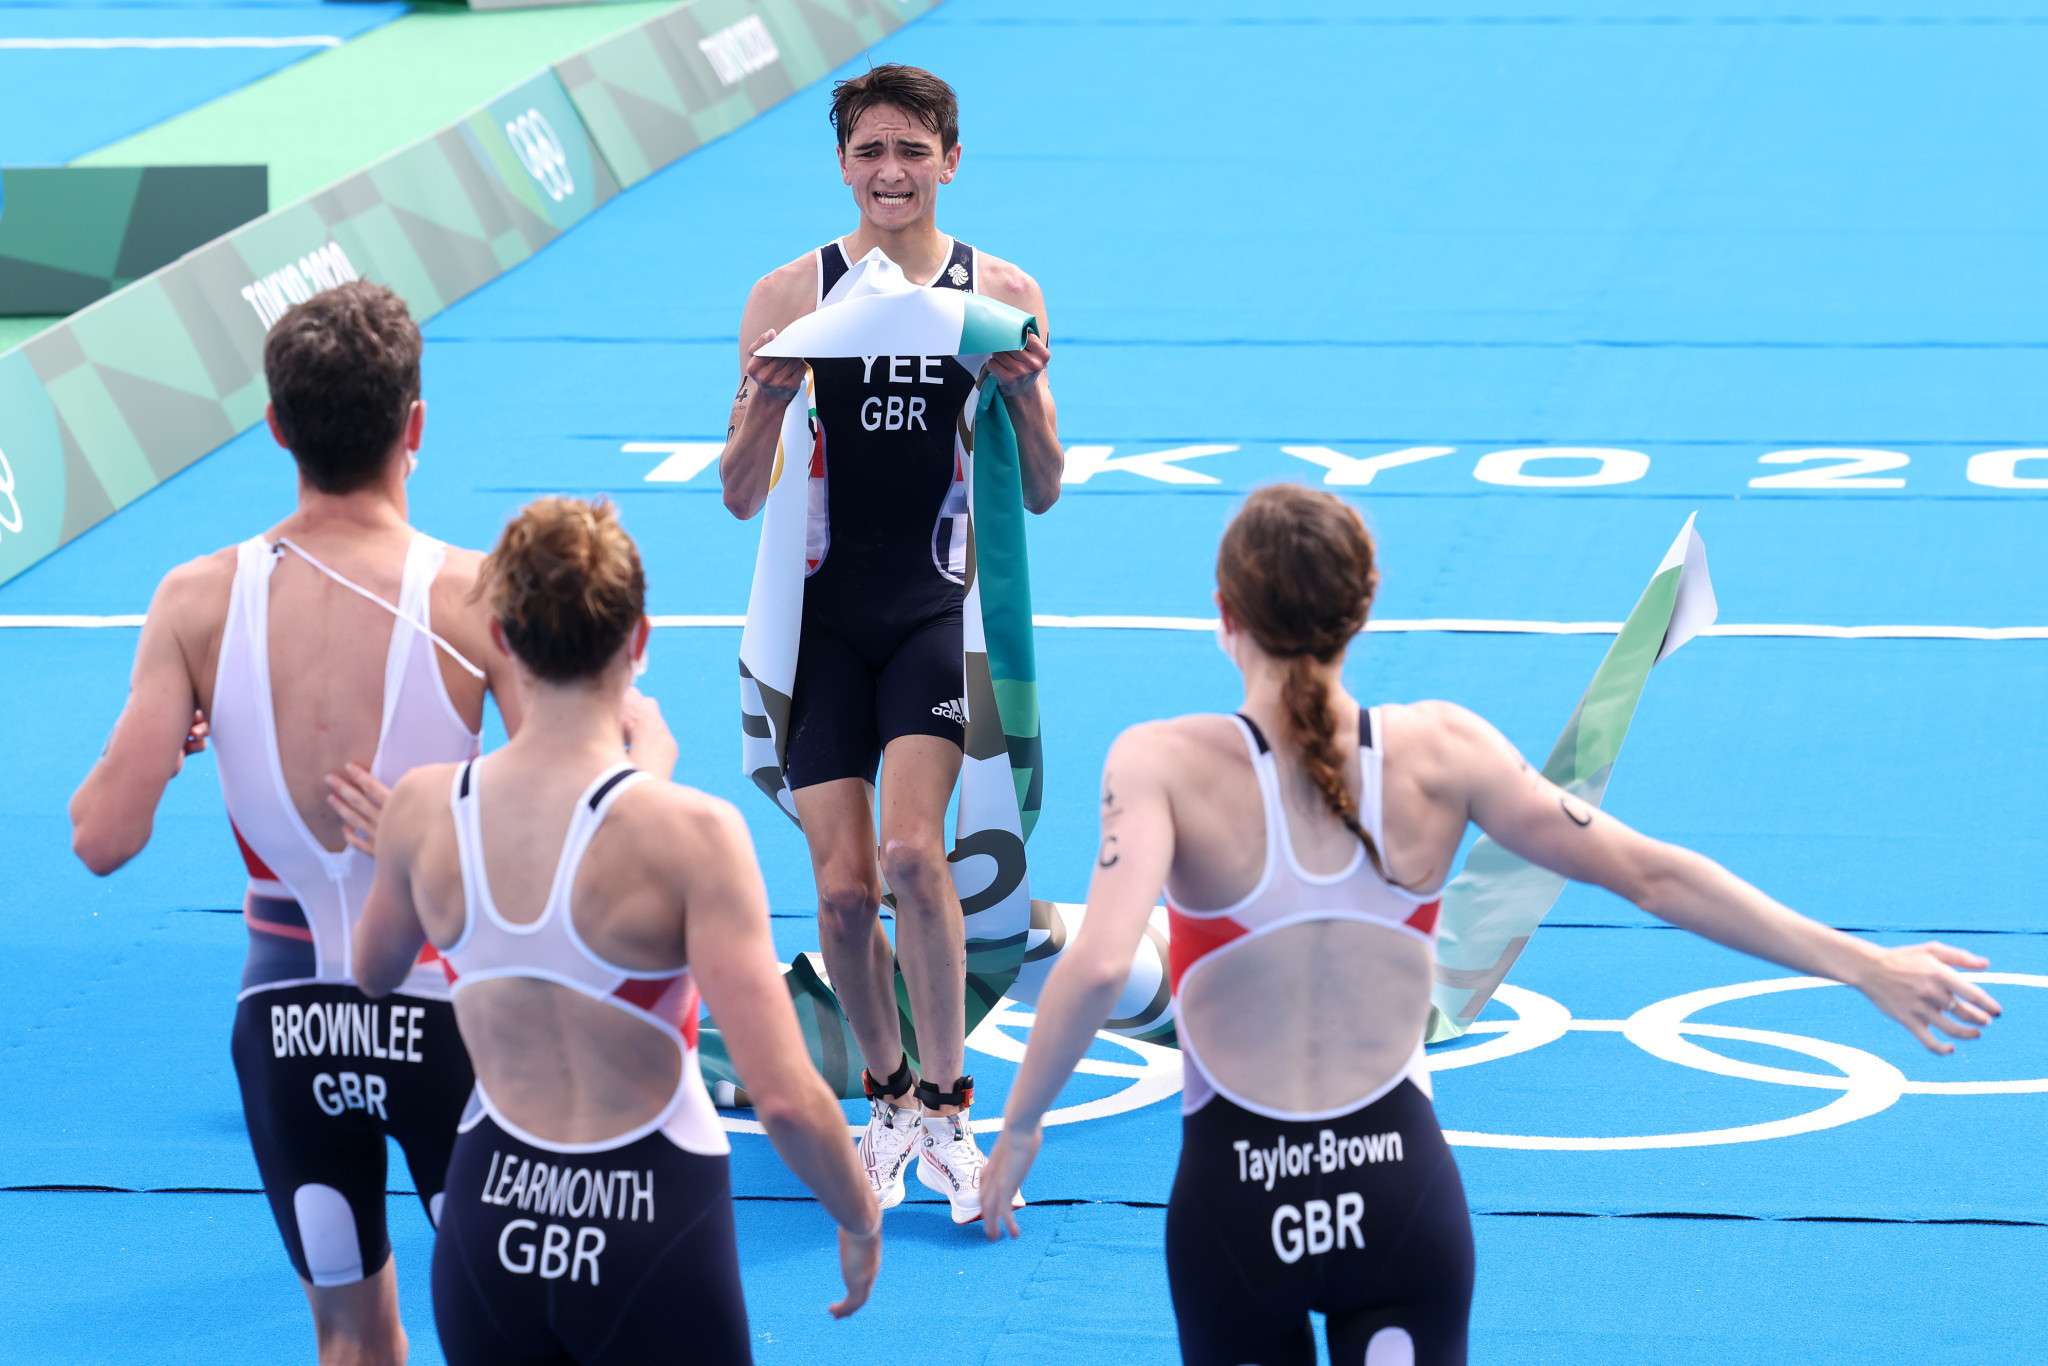 Following the inclusion of the mixed relay at Tokyo 2020, triathlon is not being prioritised for a discipline increase by the IOC ©Getty Images